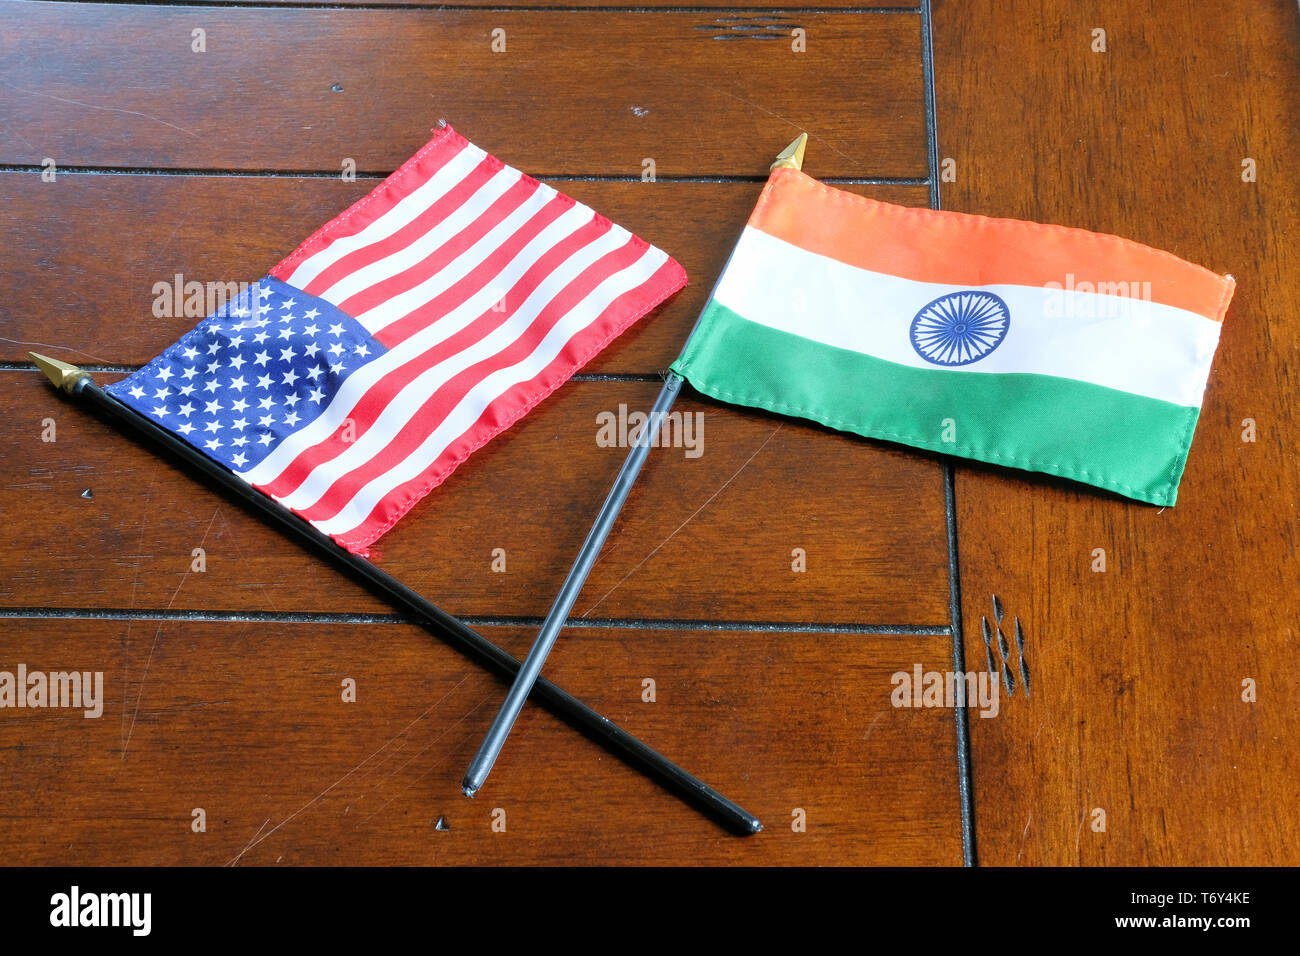 Flags of the United States and India on a wooden surface; Indian American relations. Stock Photo